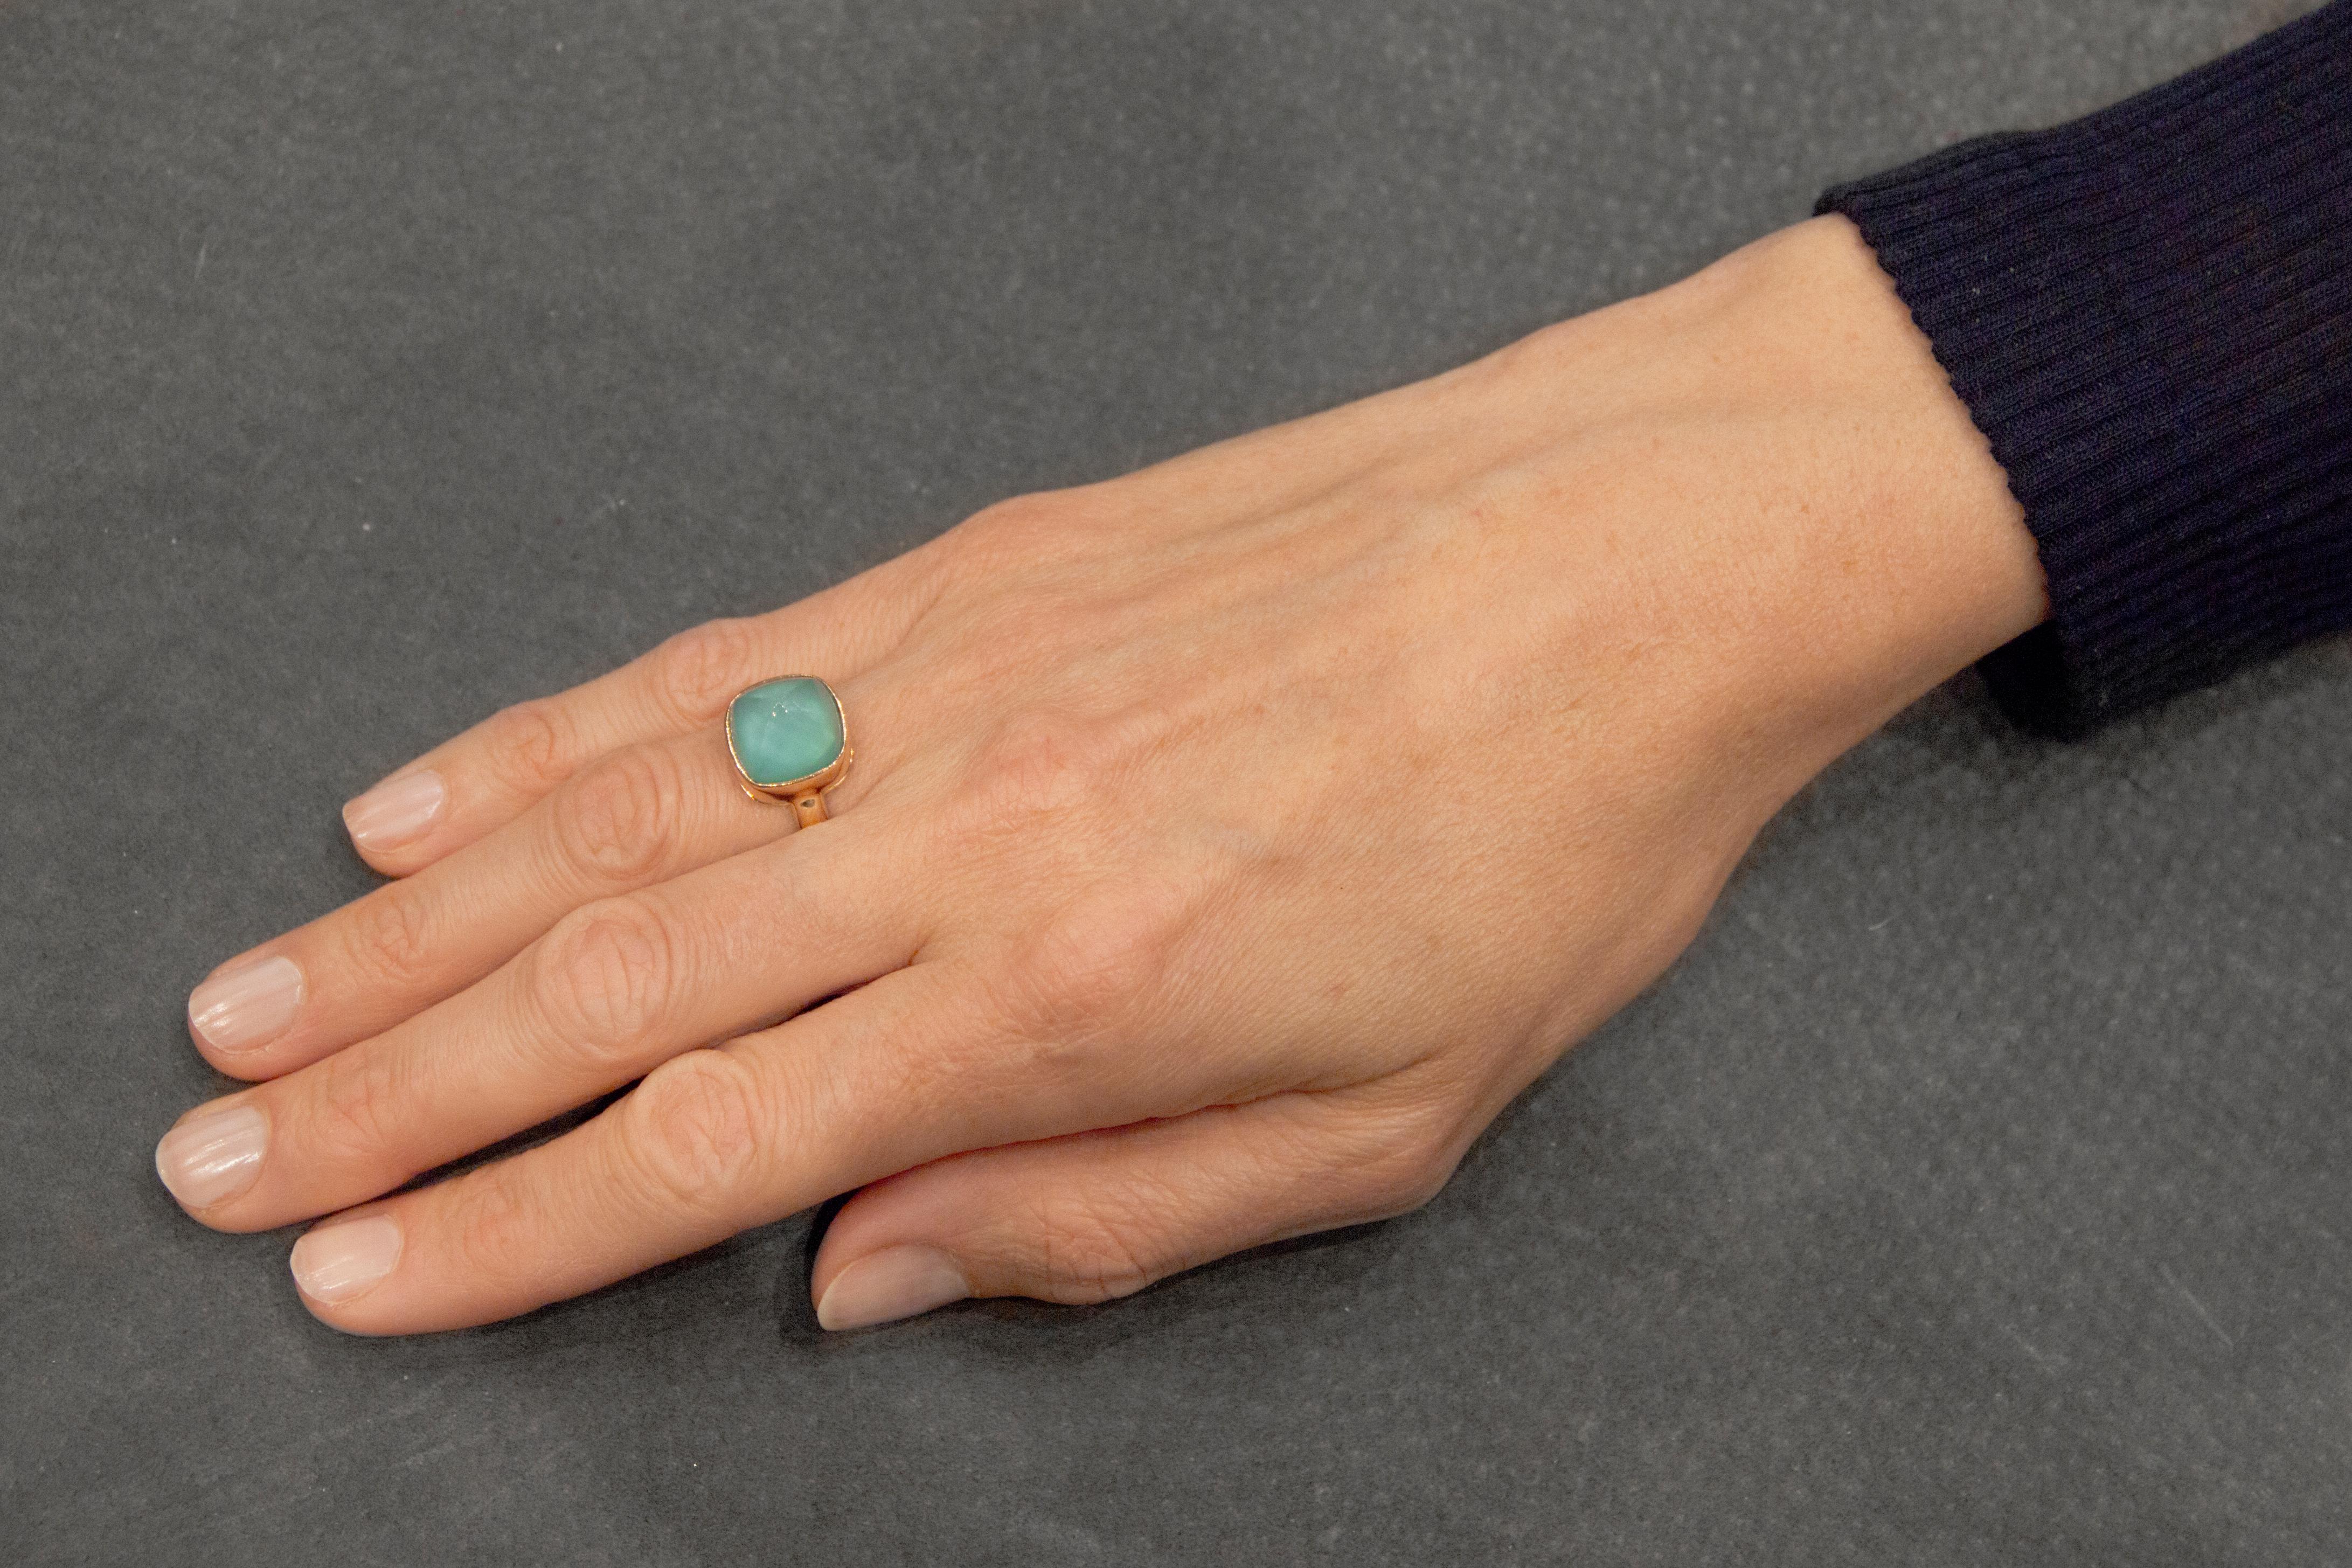 Jona design collection, hand crafted in Italy, 18 Karat yellow gold ring set with a sugar loaf quartz over turquoise, weighing 4 carats. 
Size US 6, can be sized to any specification
All Jona jewelry is new and has never been previously owned or